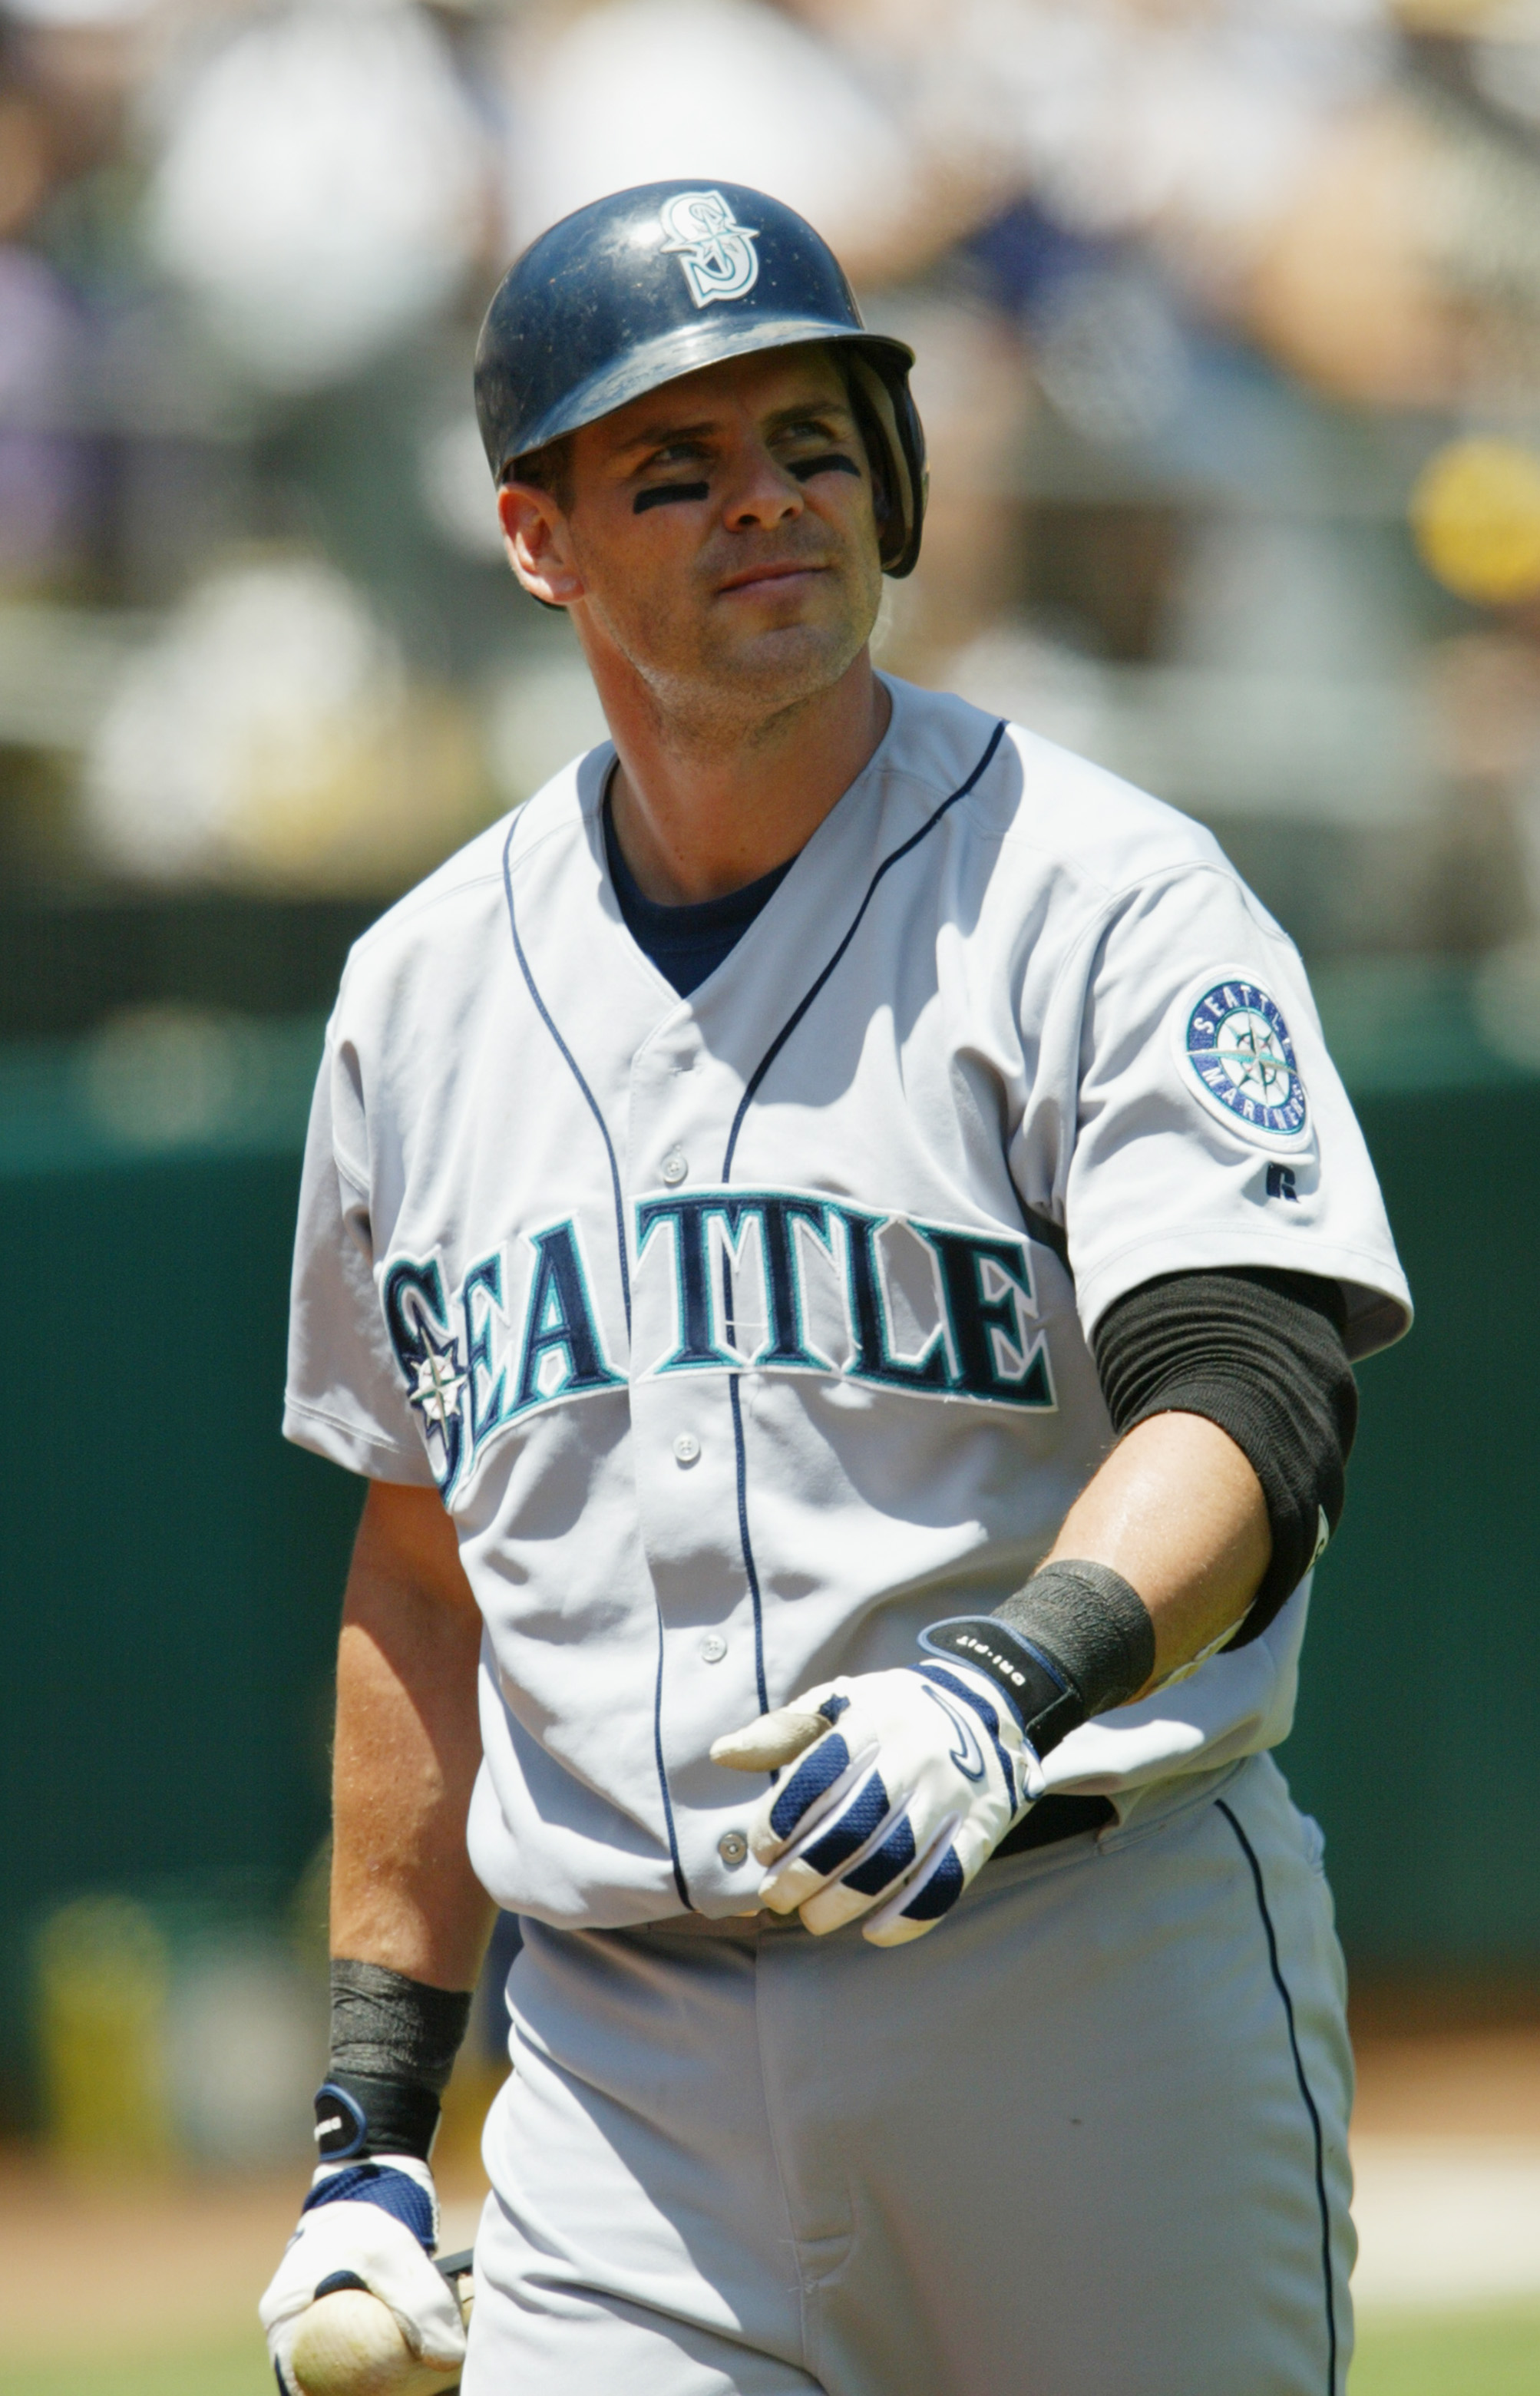 OAKLAND, CA - JULY 3:  Third baseman Jeff Cirillo #7 of the Seattle Mariners walks to the dugout after his at bat during the American League game against the Oakland Athletics on July 3, 2003 at the Network Associates Coliseum in Oakland, California. The